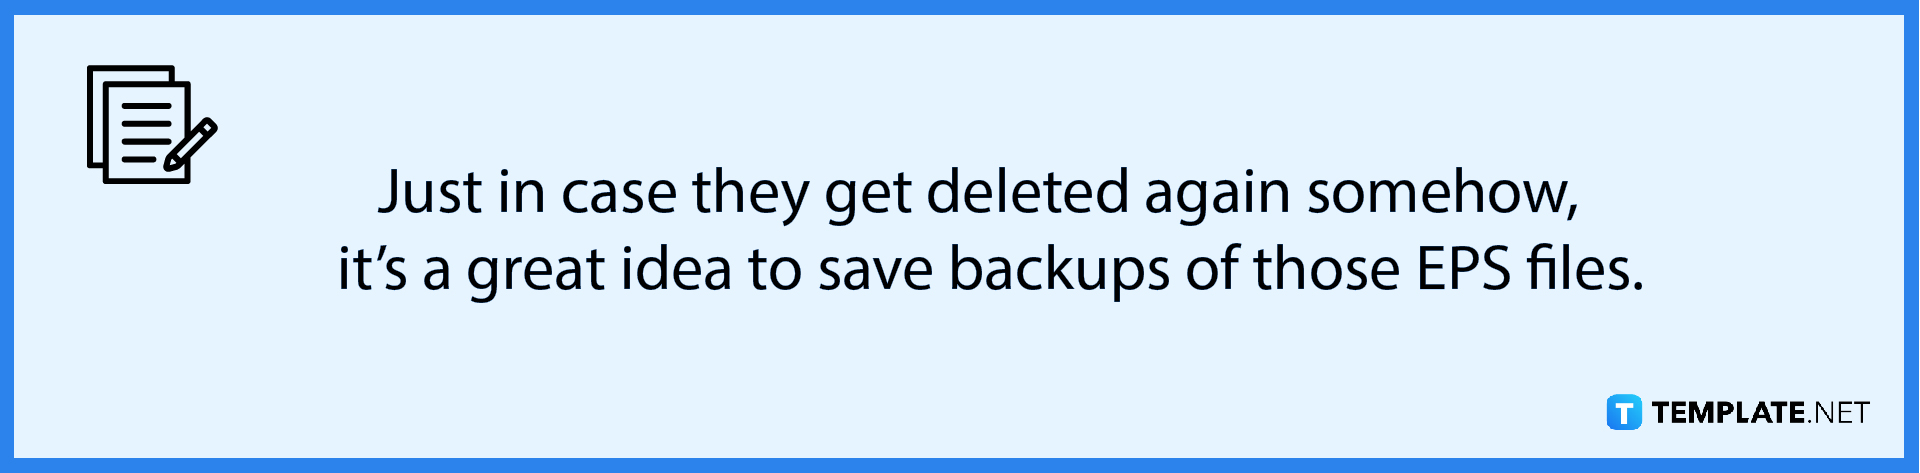 how-to-recover-deleted-eps-files-note-01